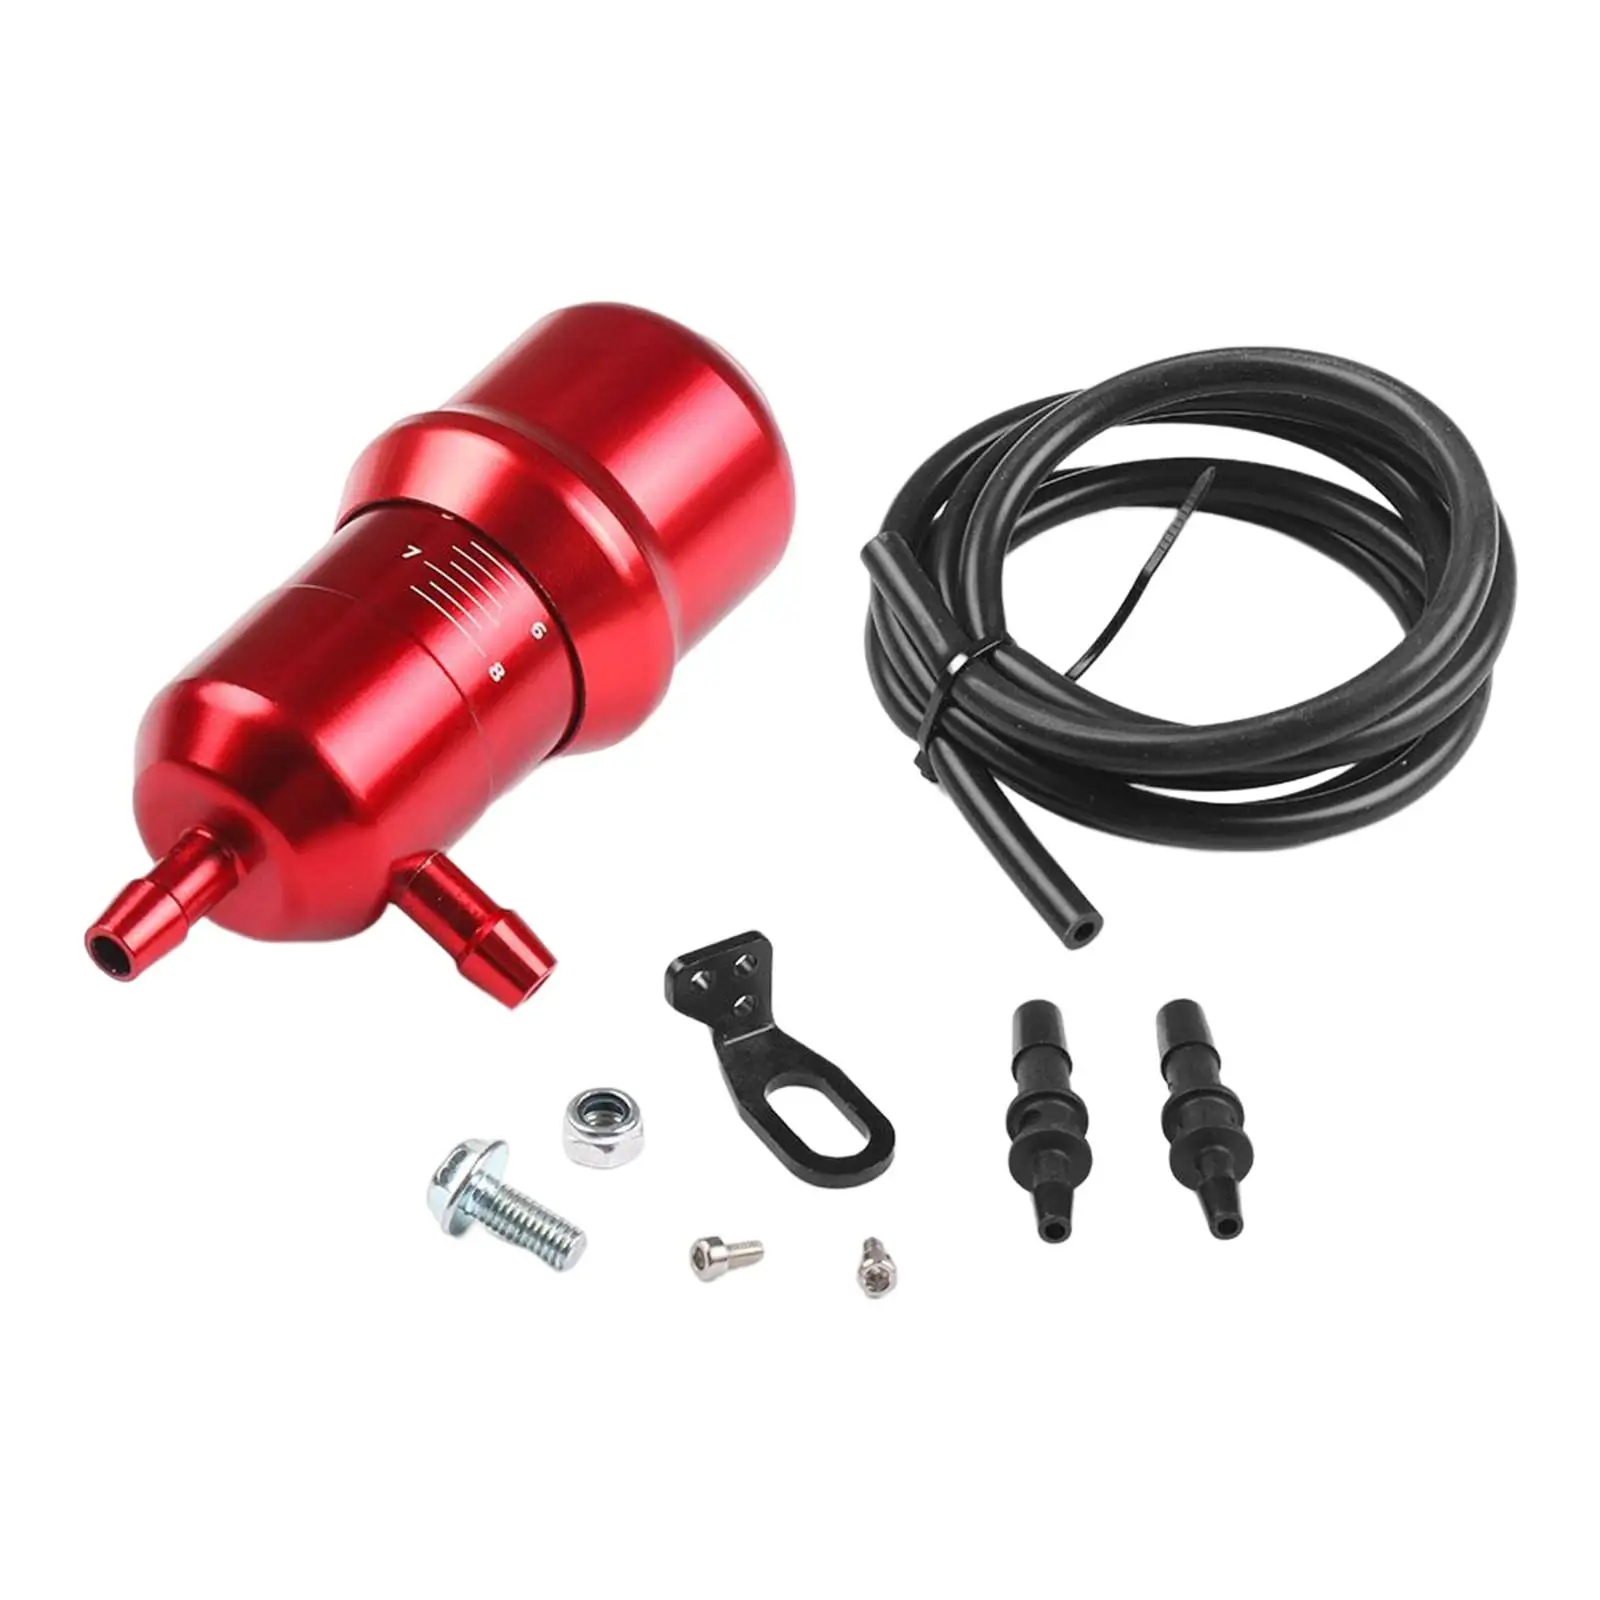 Manual Boost Controller PSI Boost Bleed Vehicle Parts